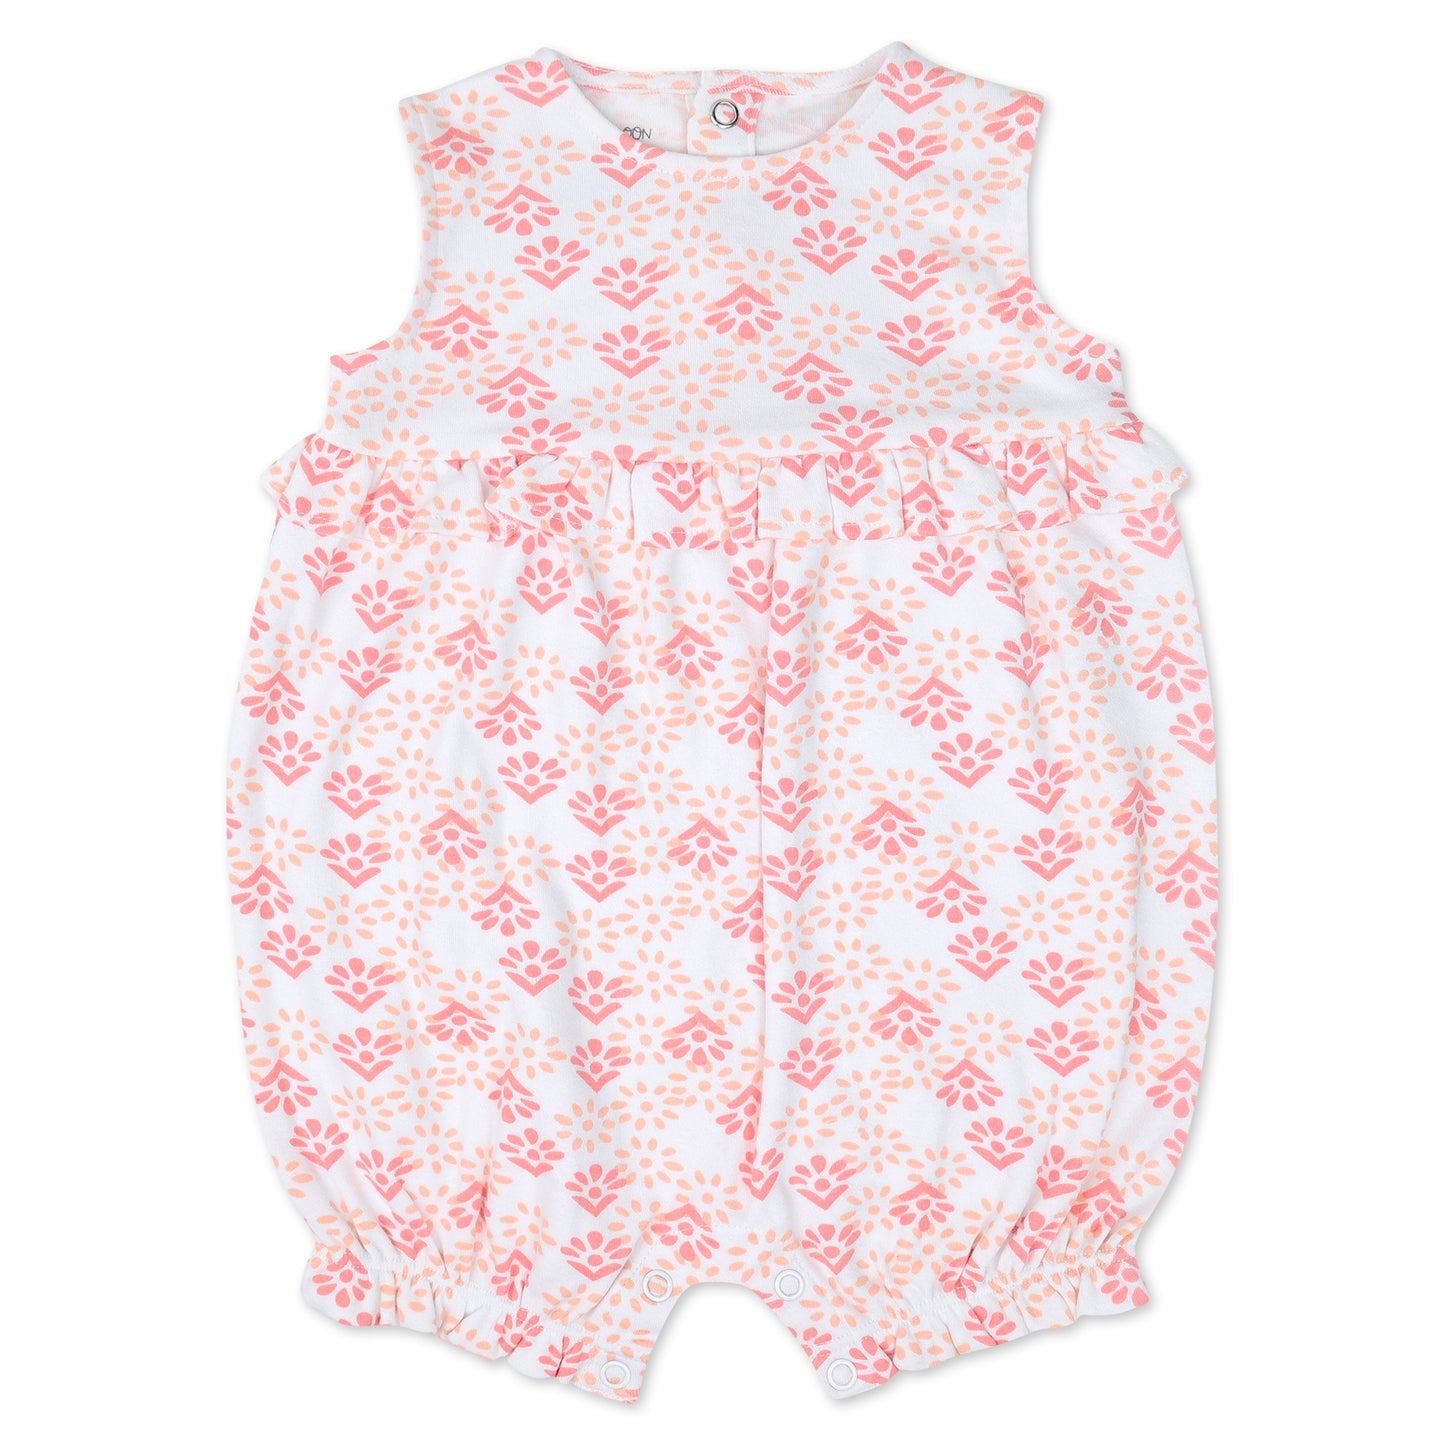 Organic Cotton 2-Pack Romper in Elephant Blooms Print